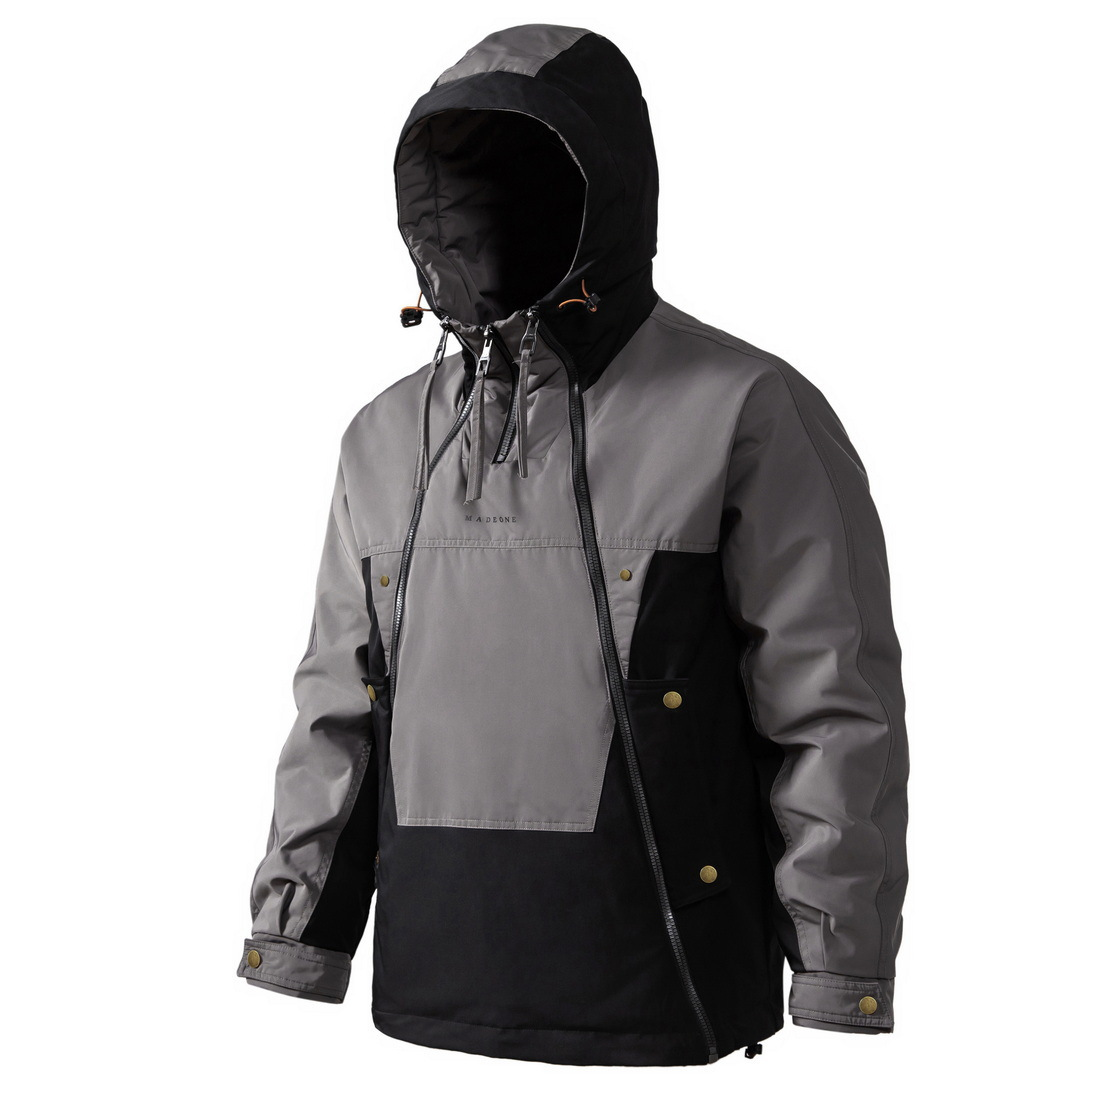 IGNITION CT-370 HARDSHELL FIELD DOWN JACKET